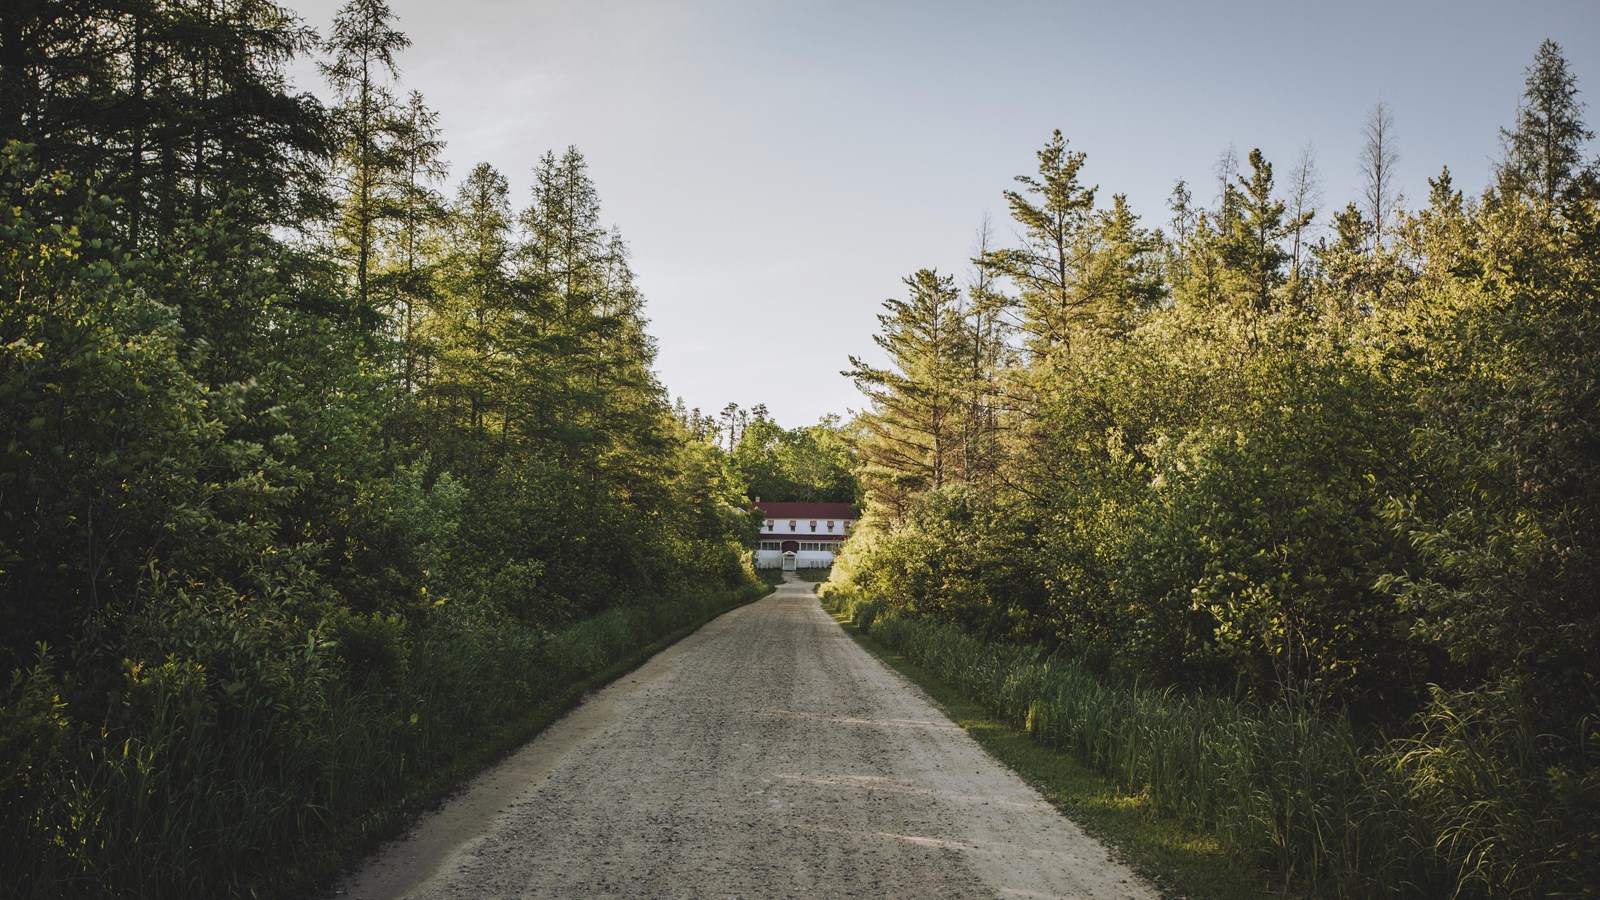 A gravel path leads through a thick forest of trees to a white hotel with a red roof.